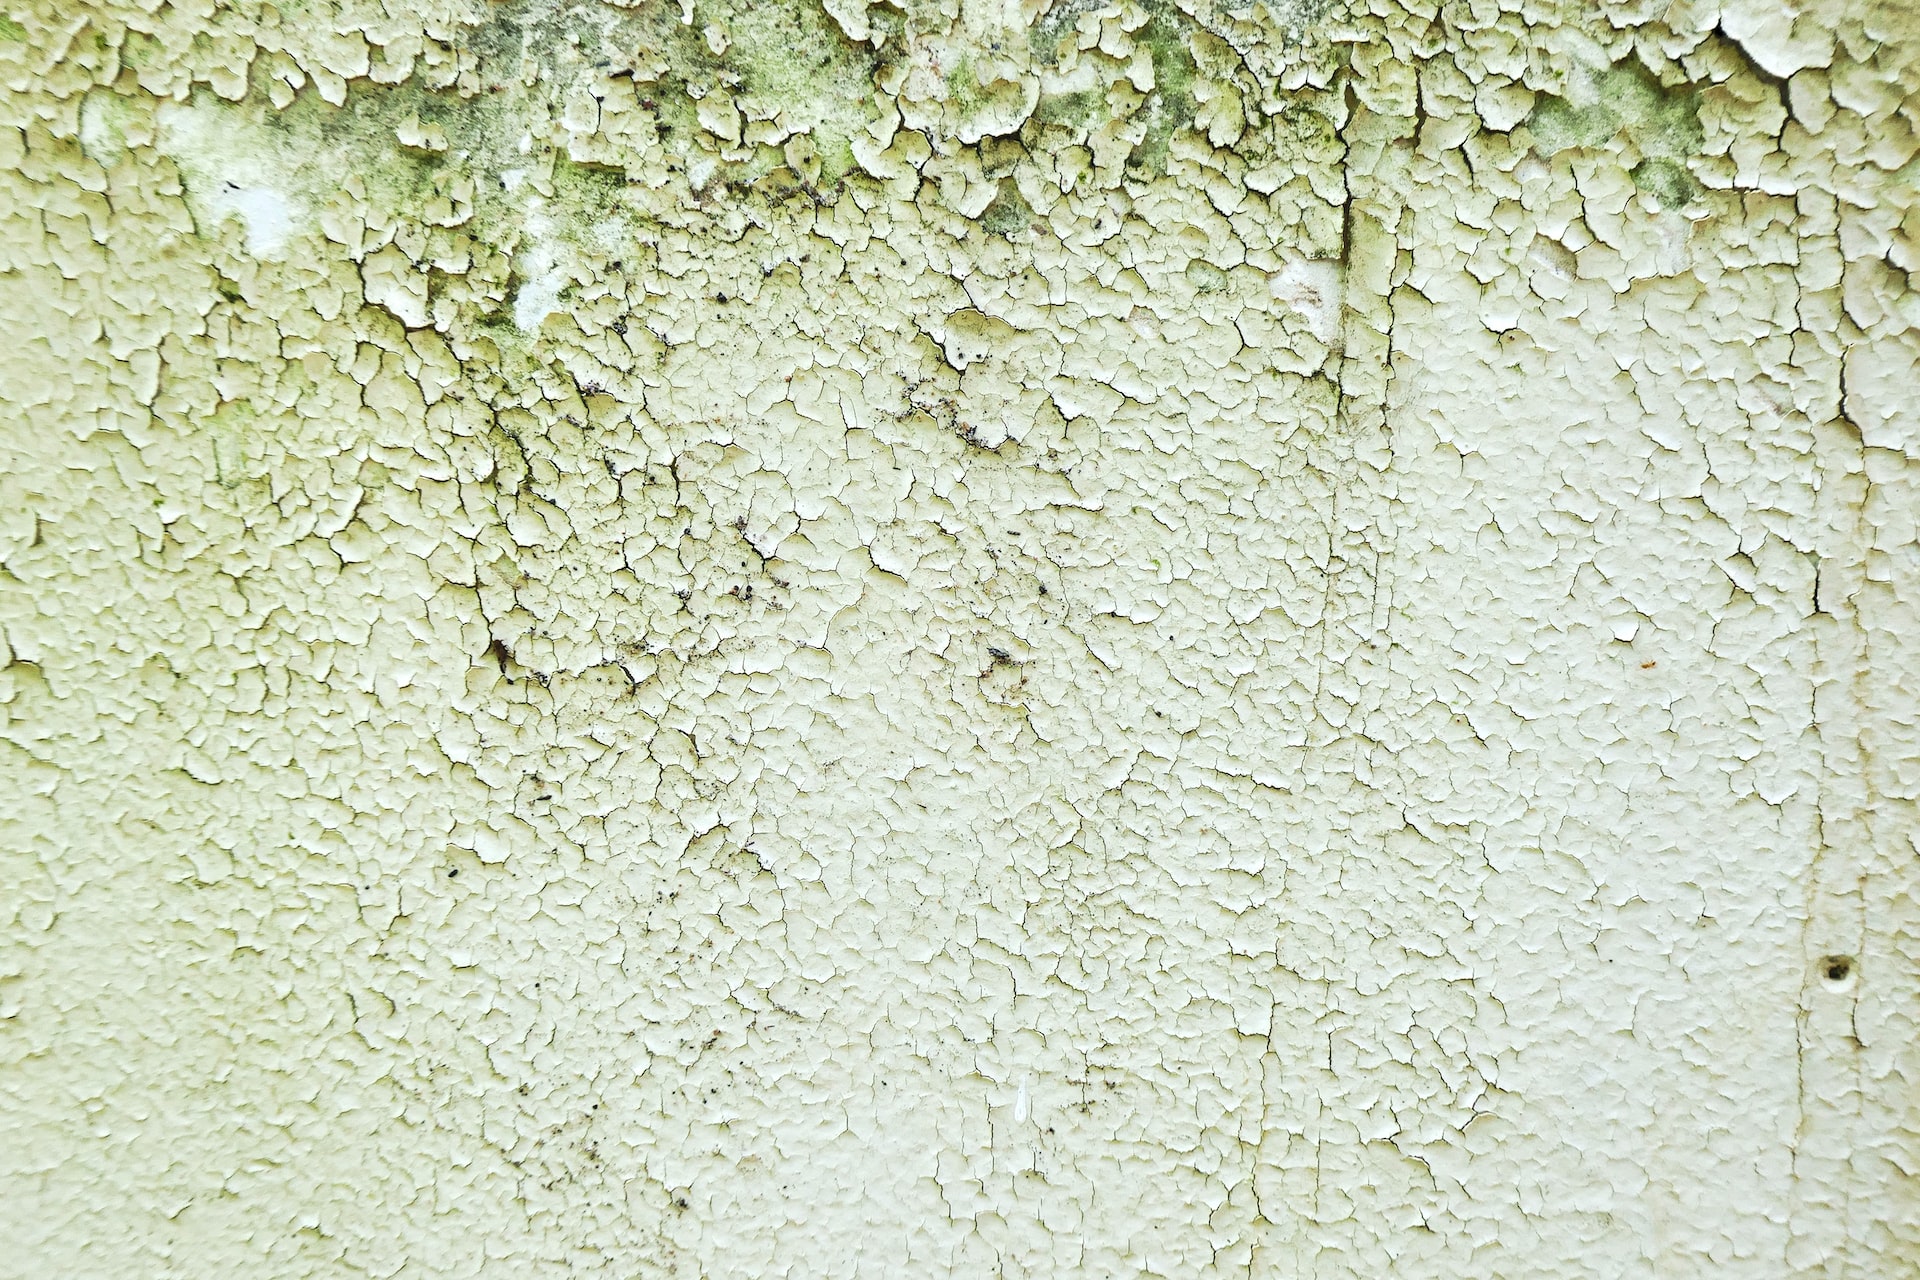 4 Steps to Take When You Suspect Mold